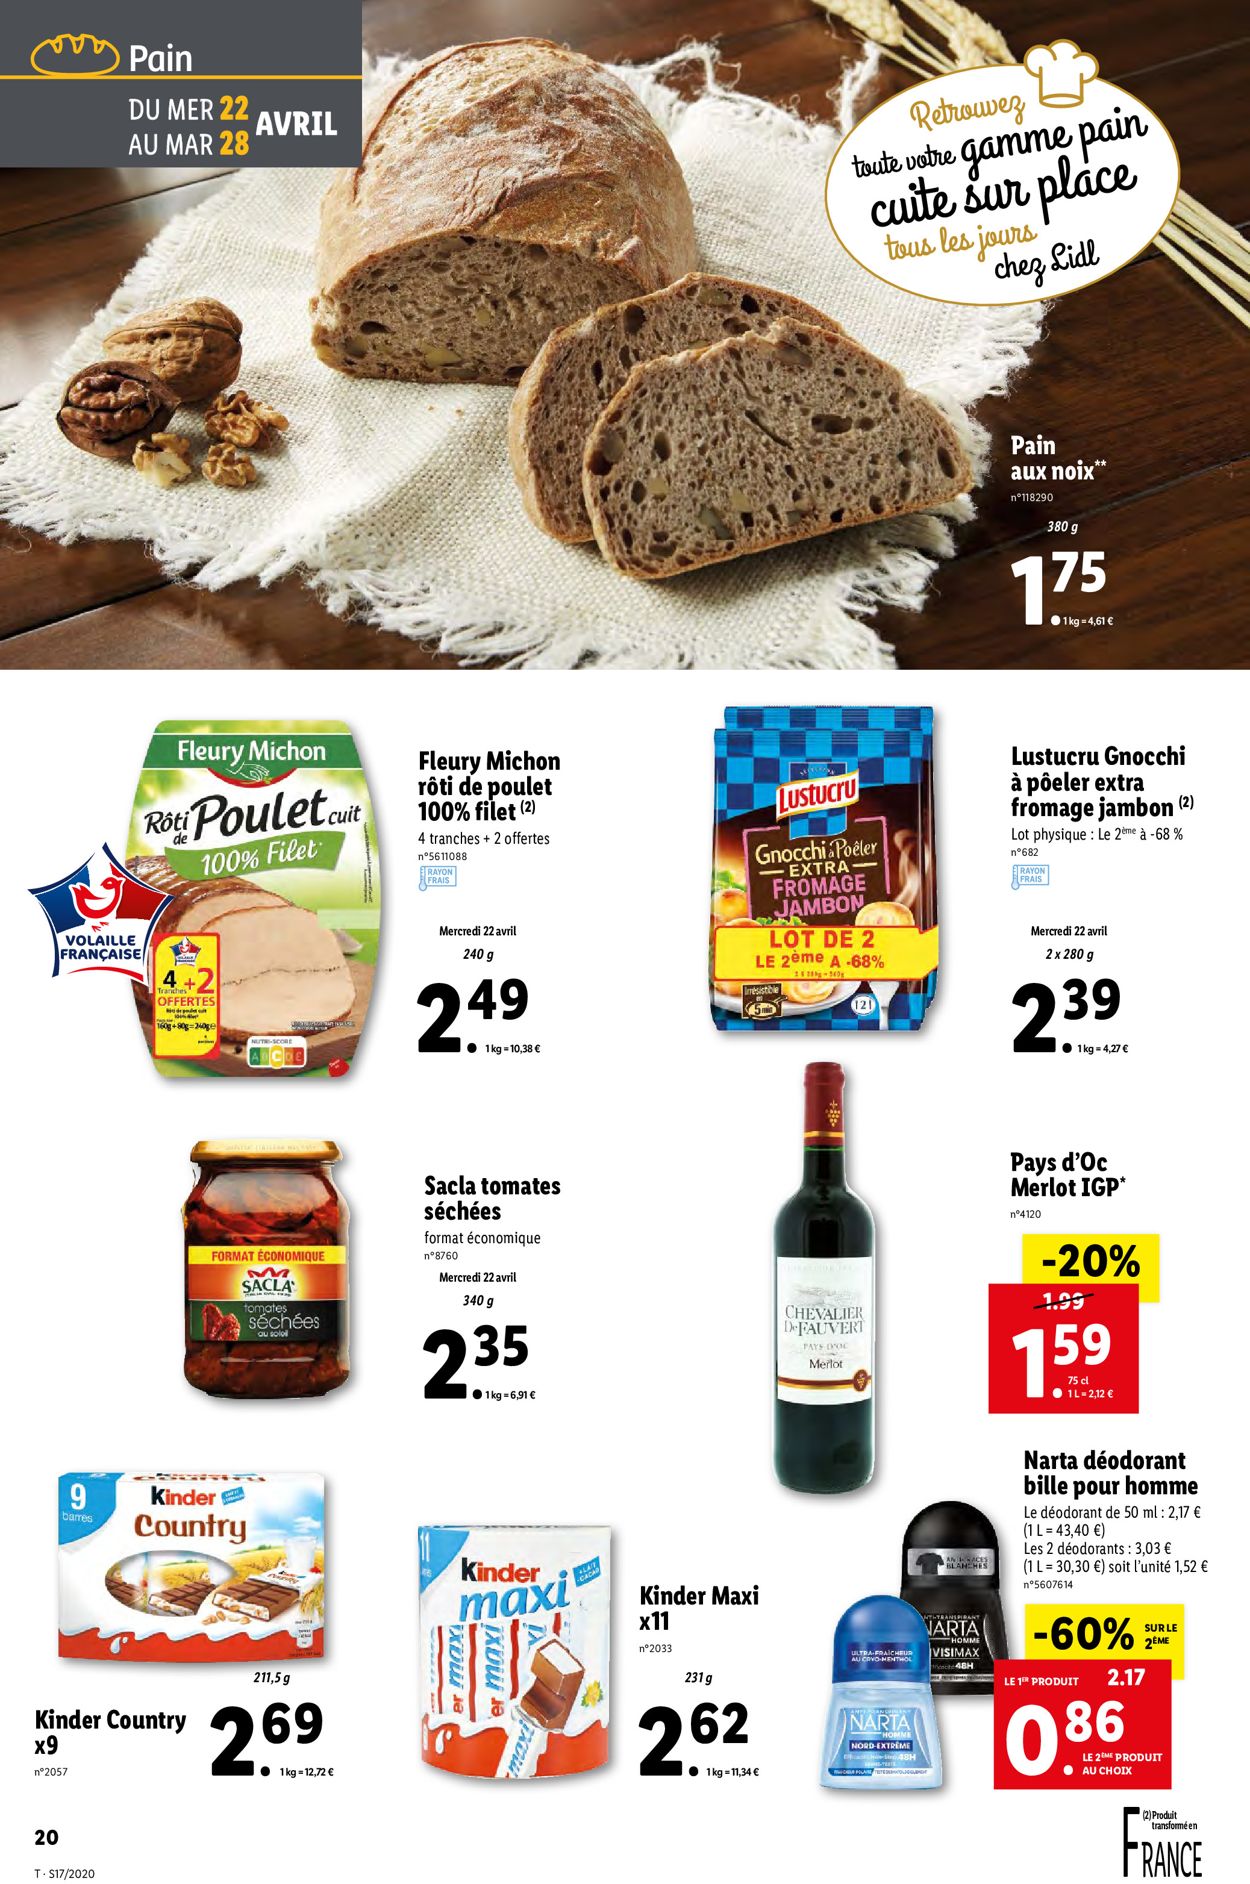 Lidl Catalogue - 22.04-28.04.2020 (Page 20)